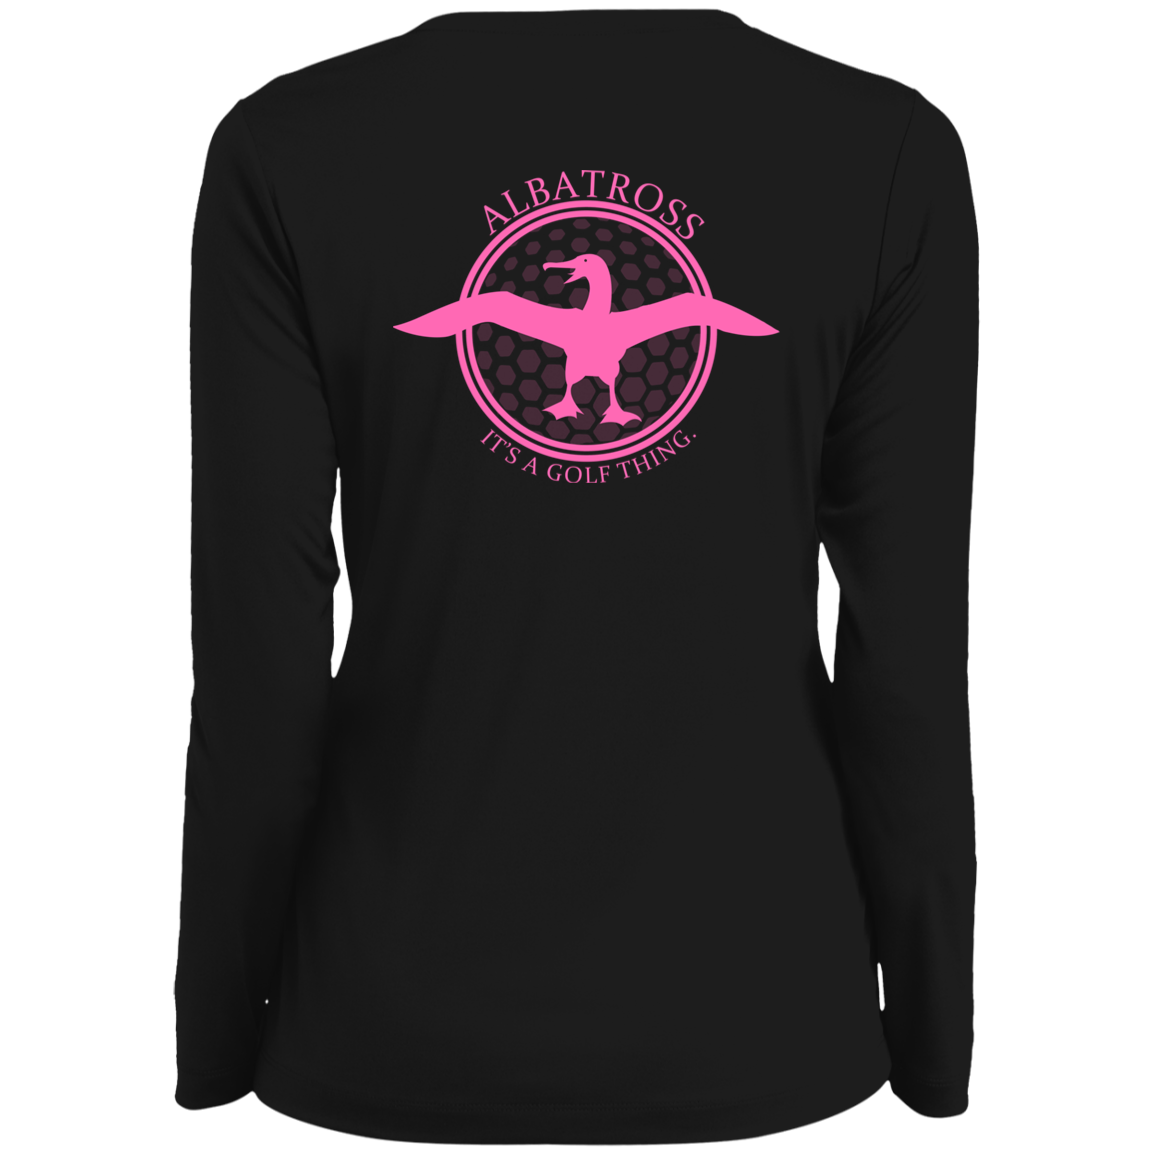 OPG Custom Artwork #1. Albatross. It's a golf thing. Ladies' 100% Polyester Wicking Knit V-Neck Tee